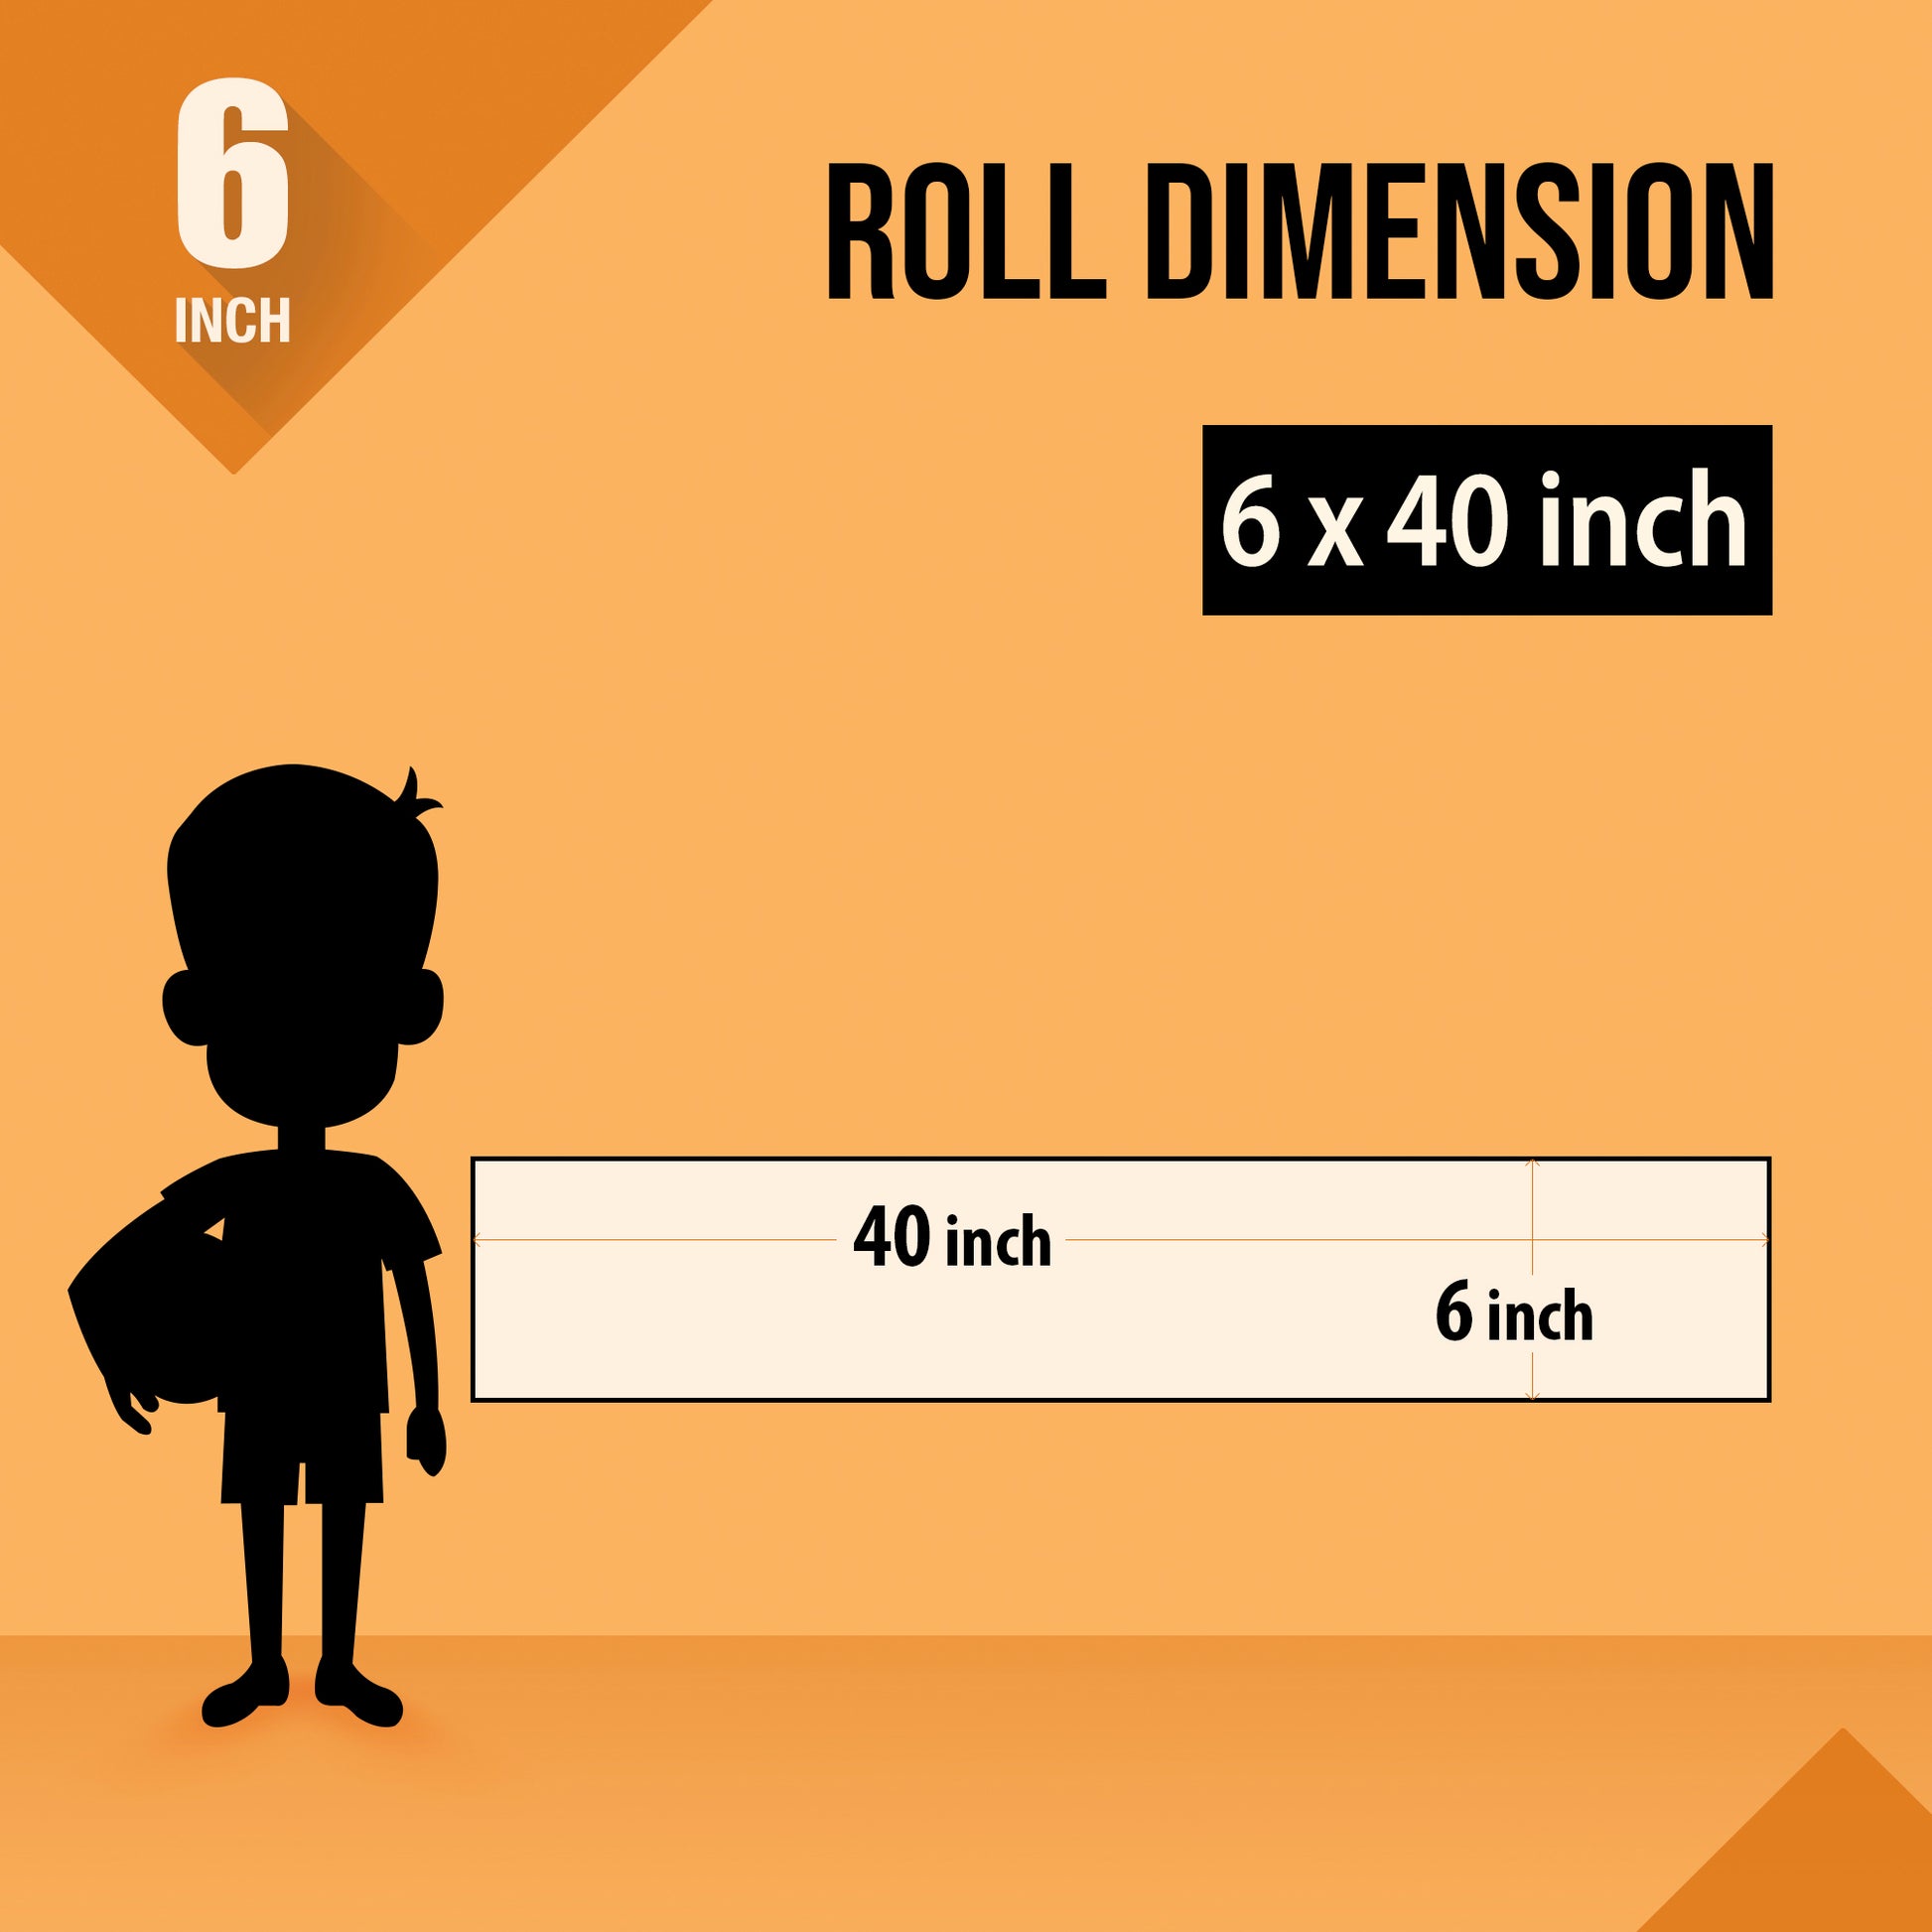 The image depicts an green background with a ruler showing a child's height next to a 6*40 inches paper roll attached to the wall.